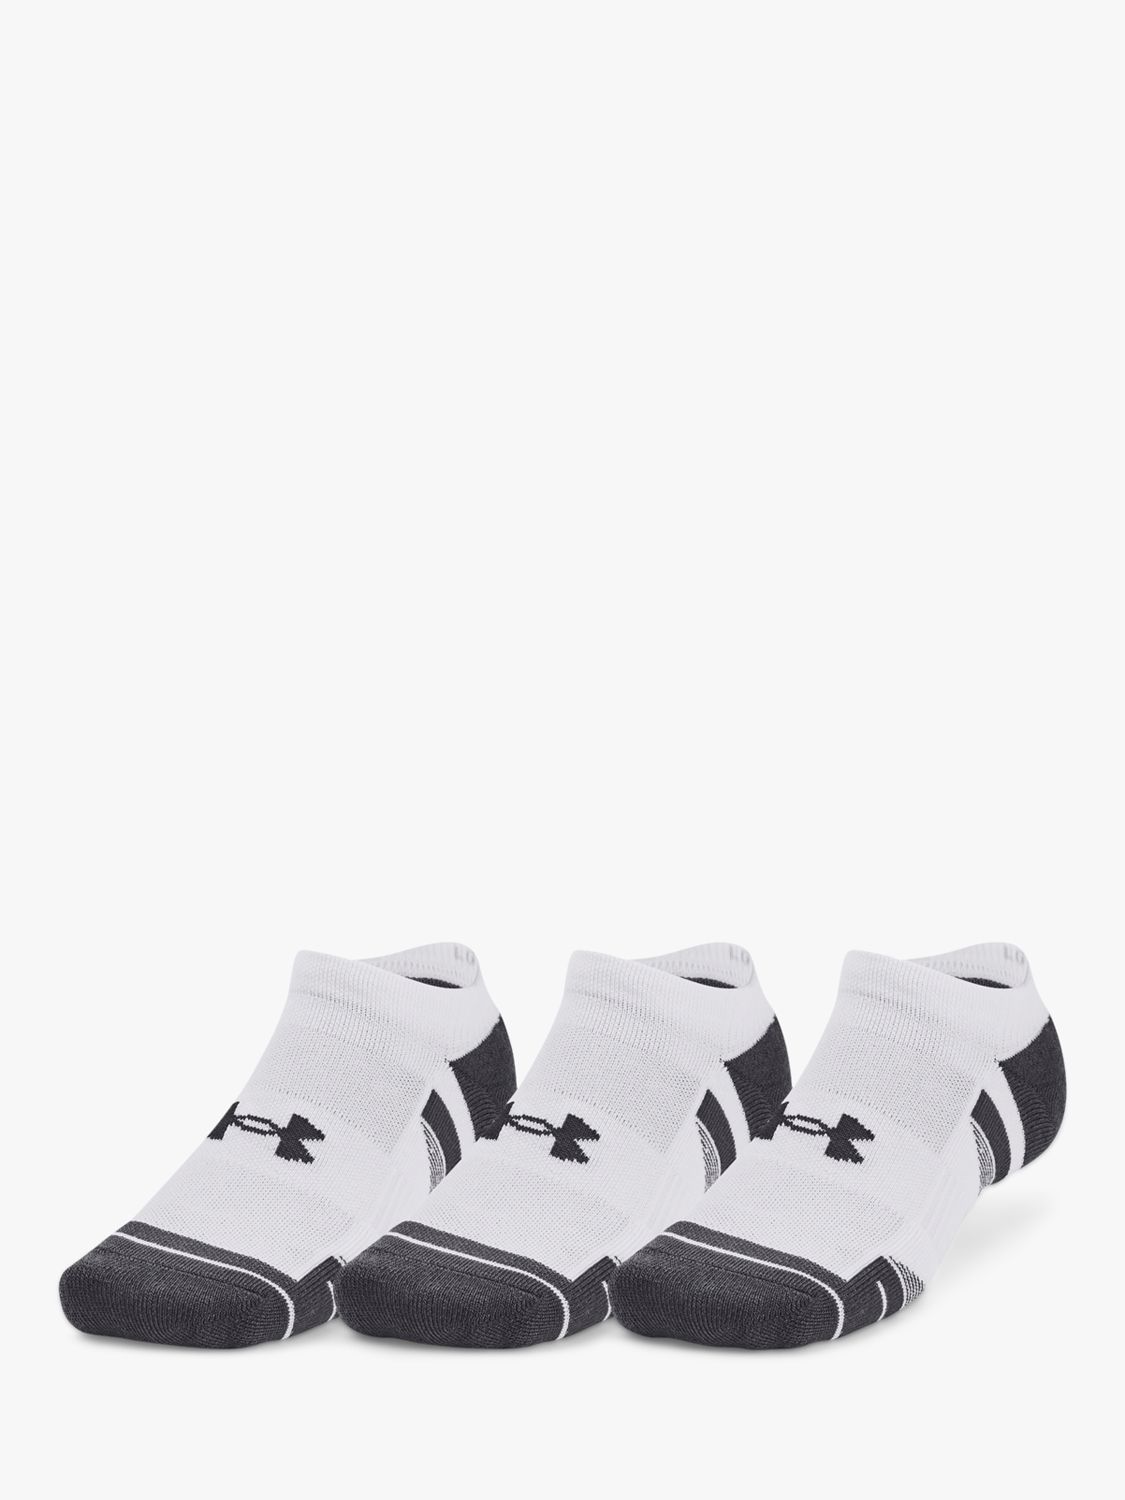 Buy Under Armour Performance Tech Socks, Pack of 3 Online at johnlewis.com